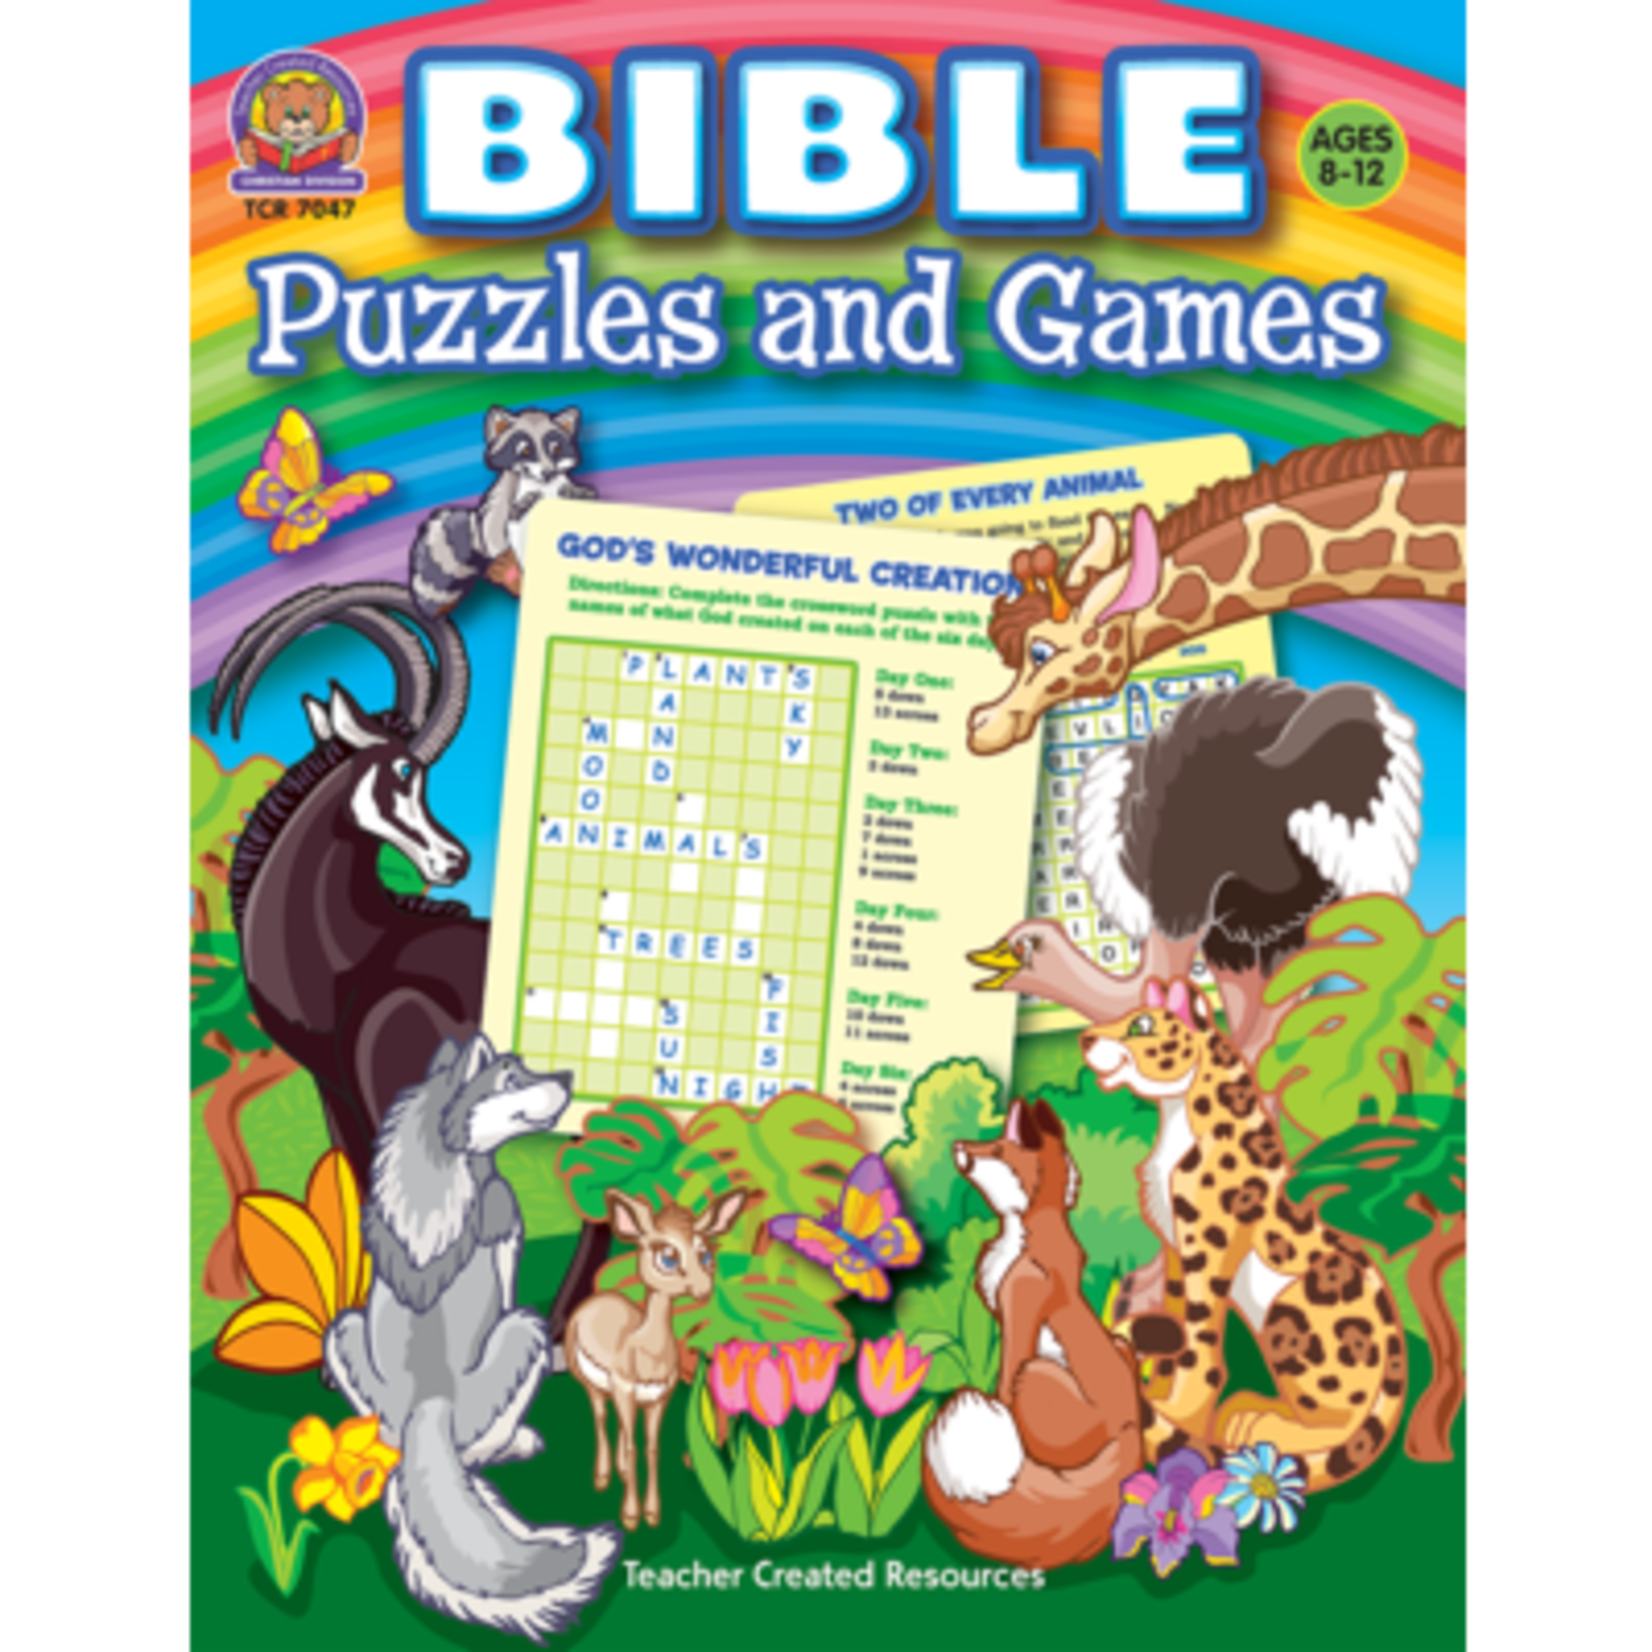 TEACHER CREATED RESOURCES Bible Puzzles and Games